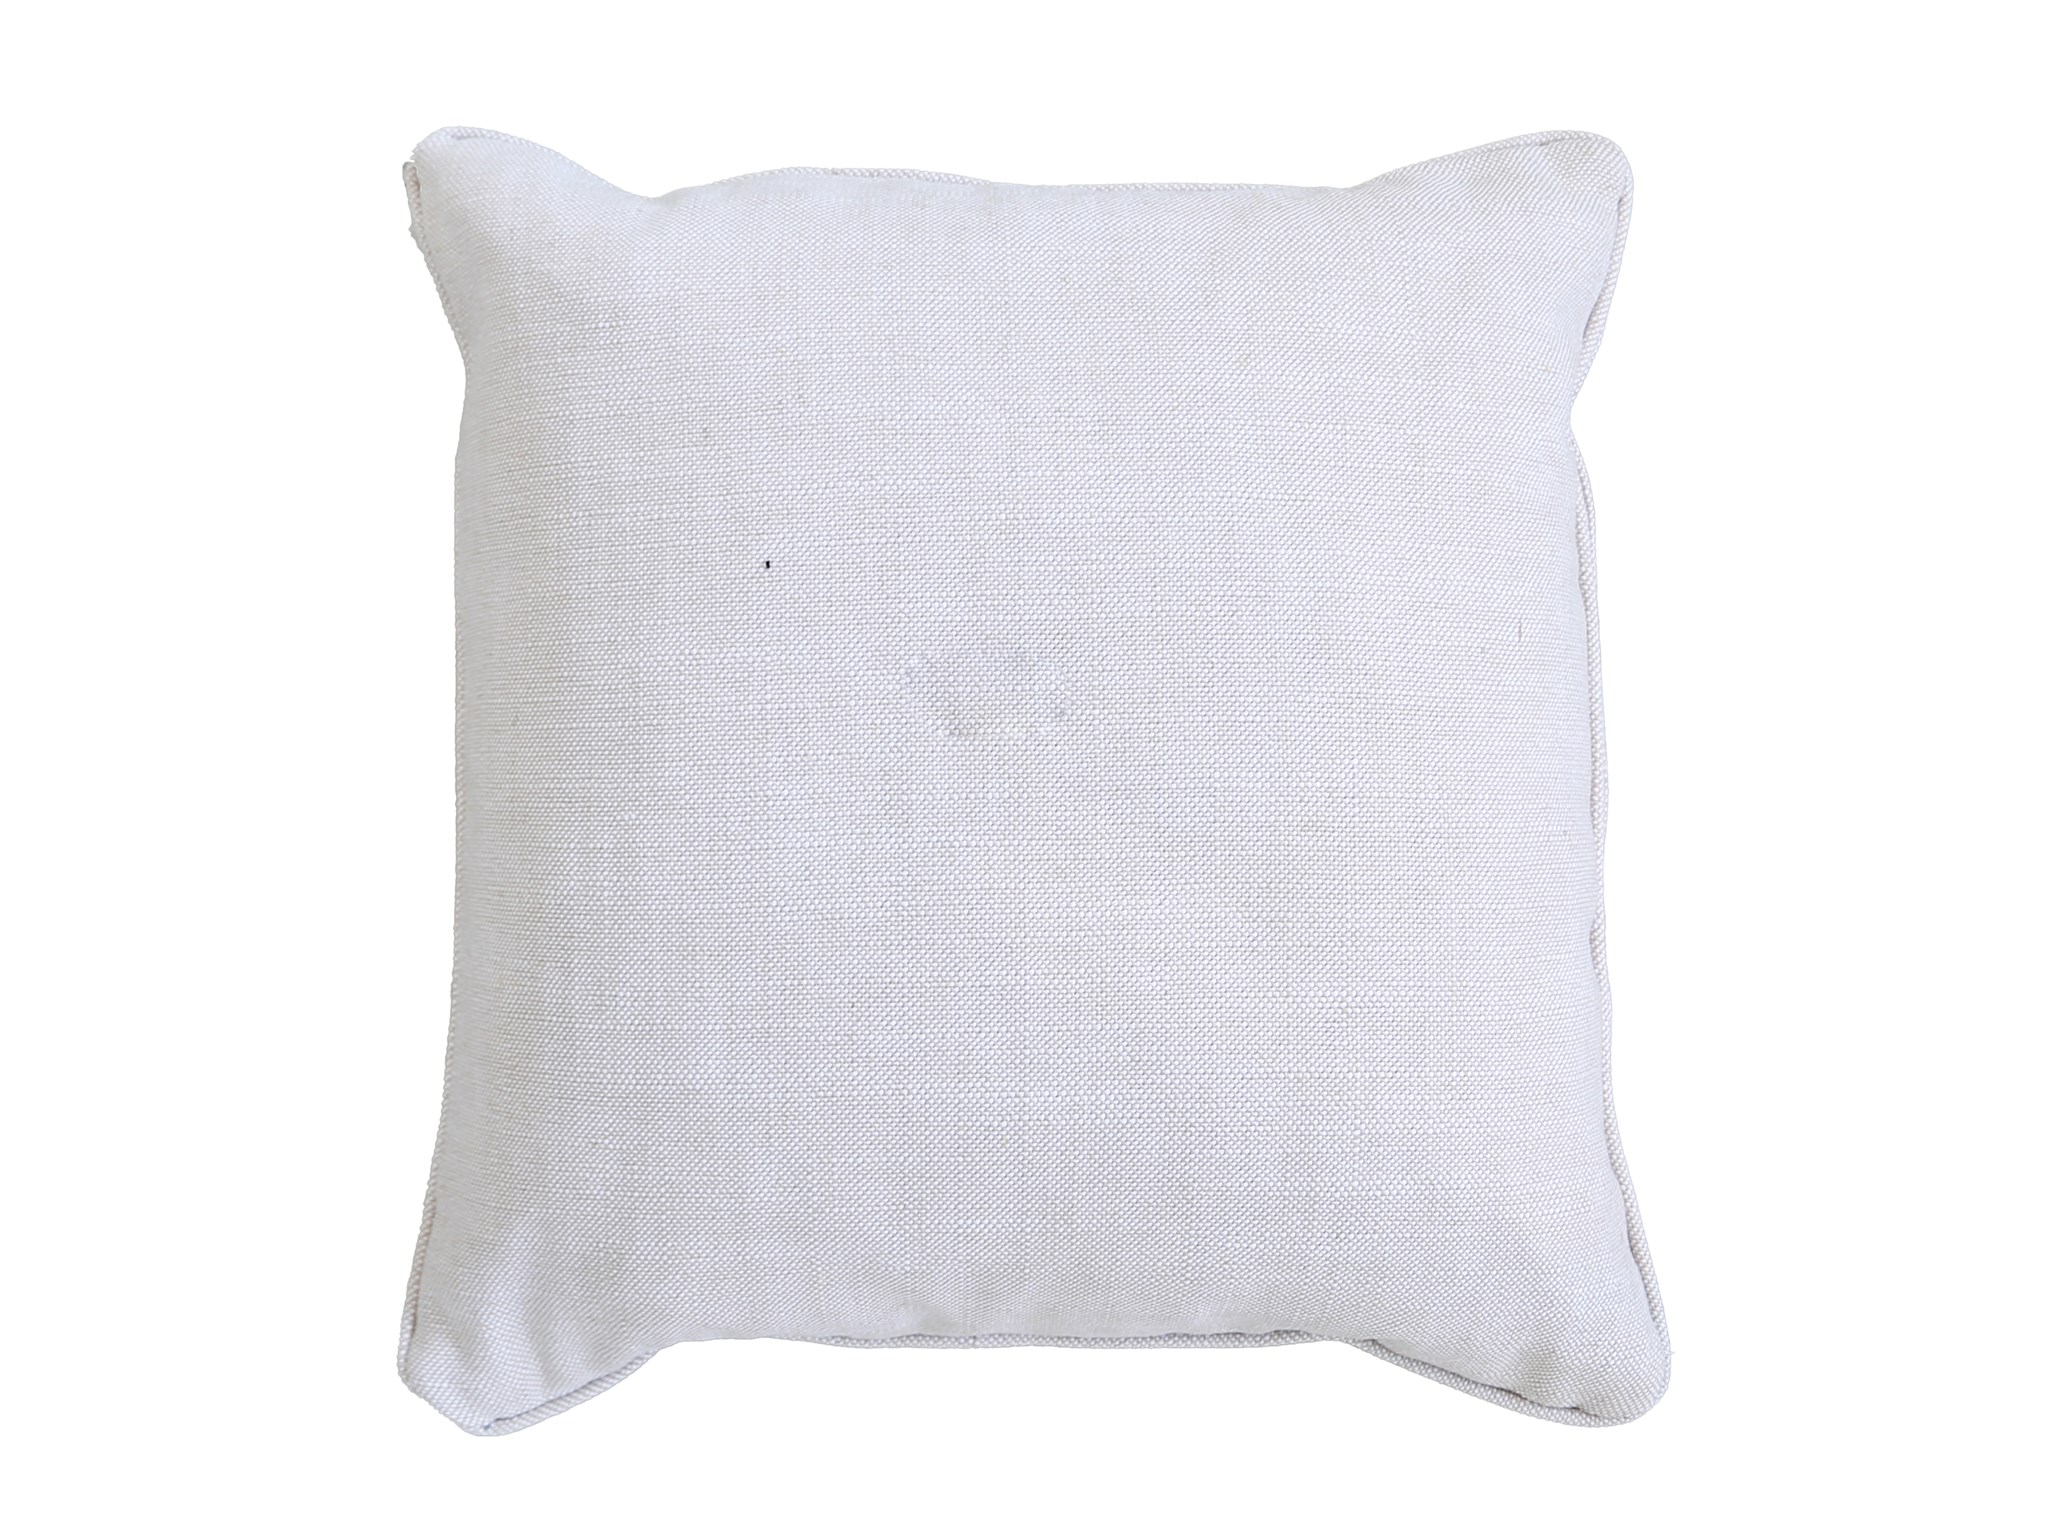 Pillow 24x24 -Special Order